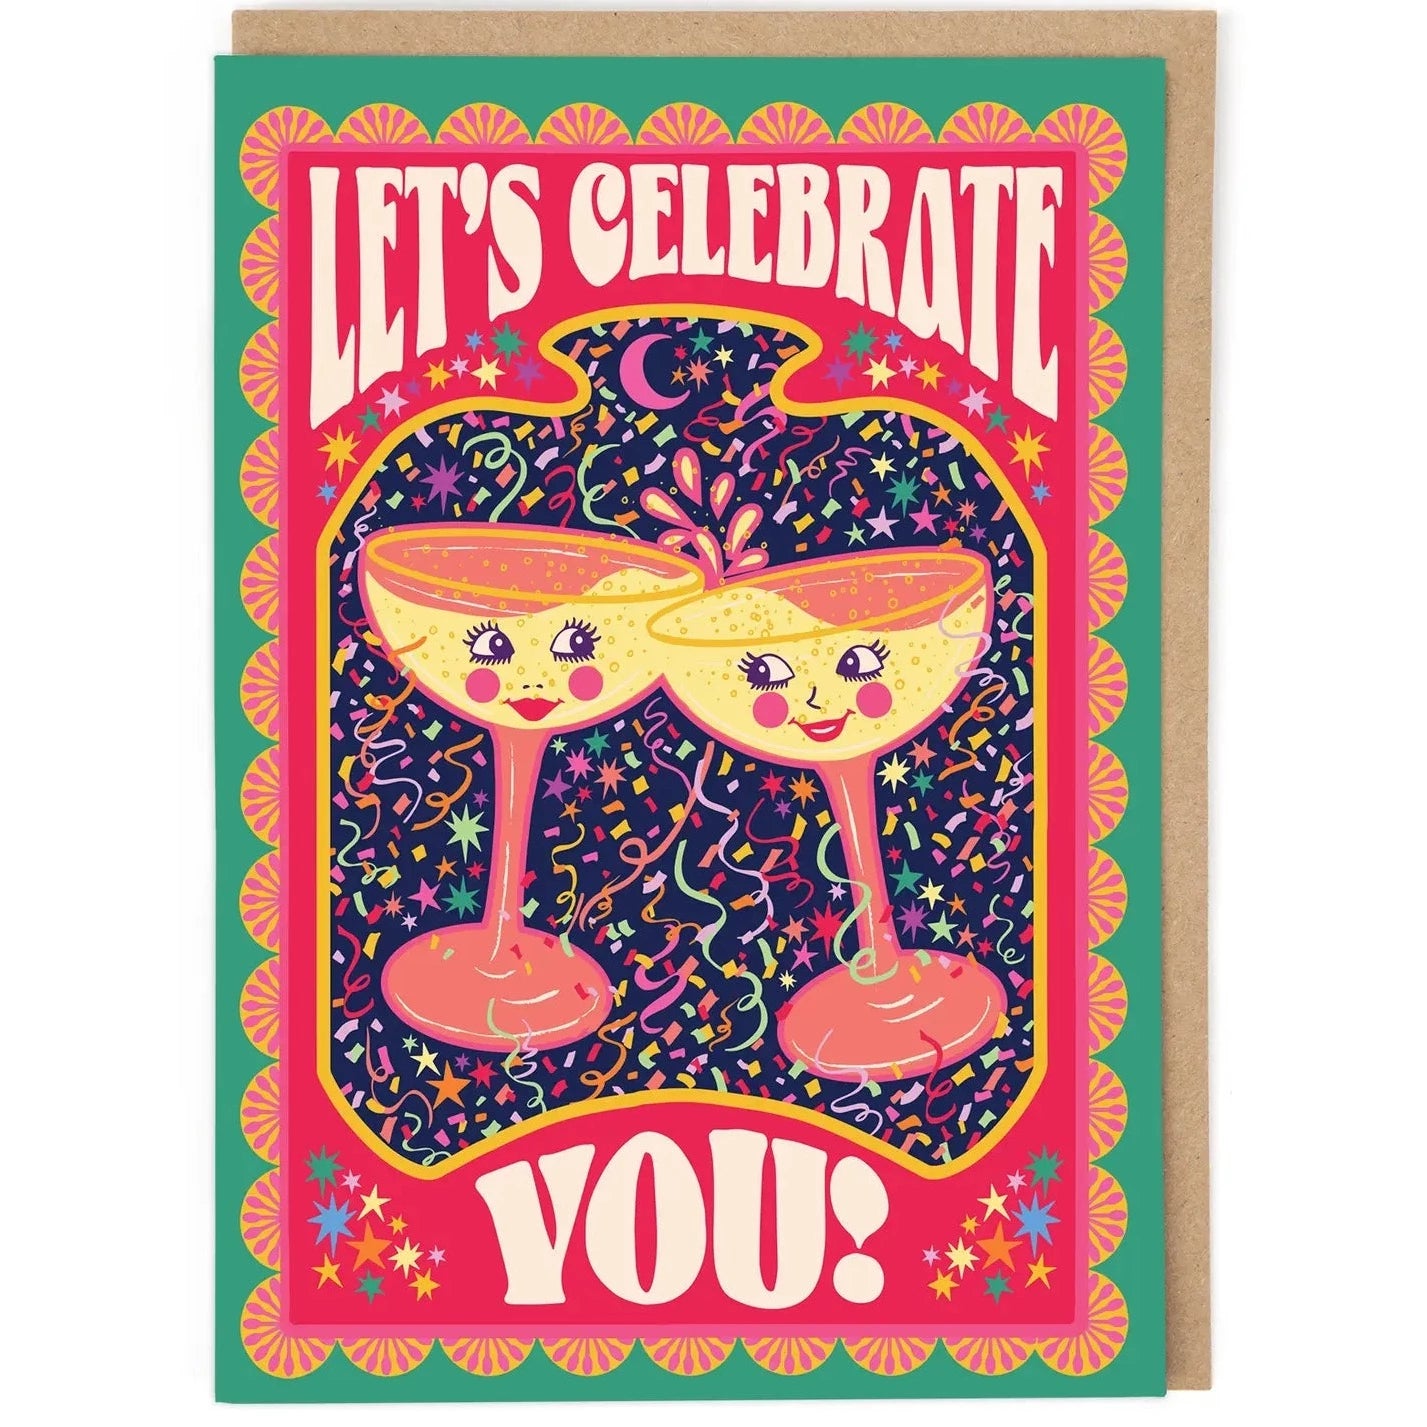 Let's Celebrate You Greeting Card